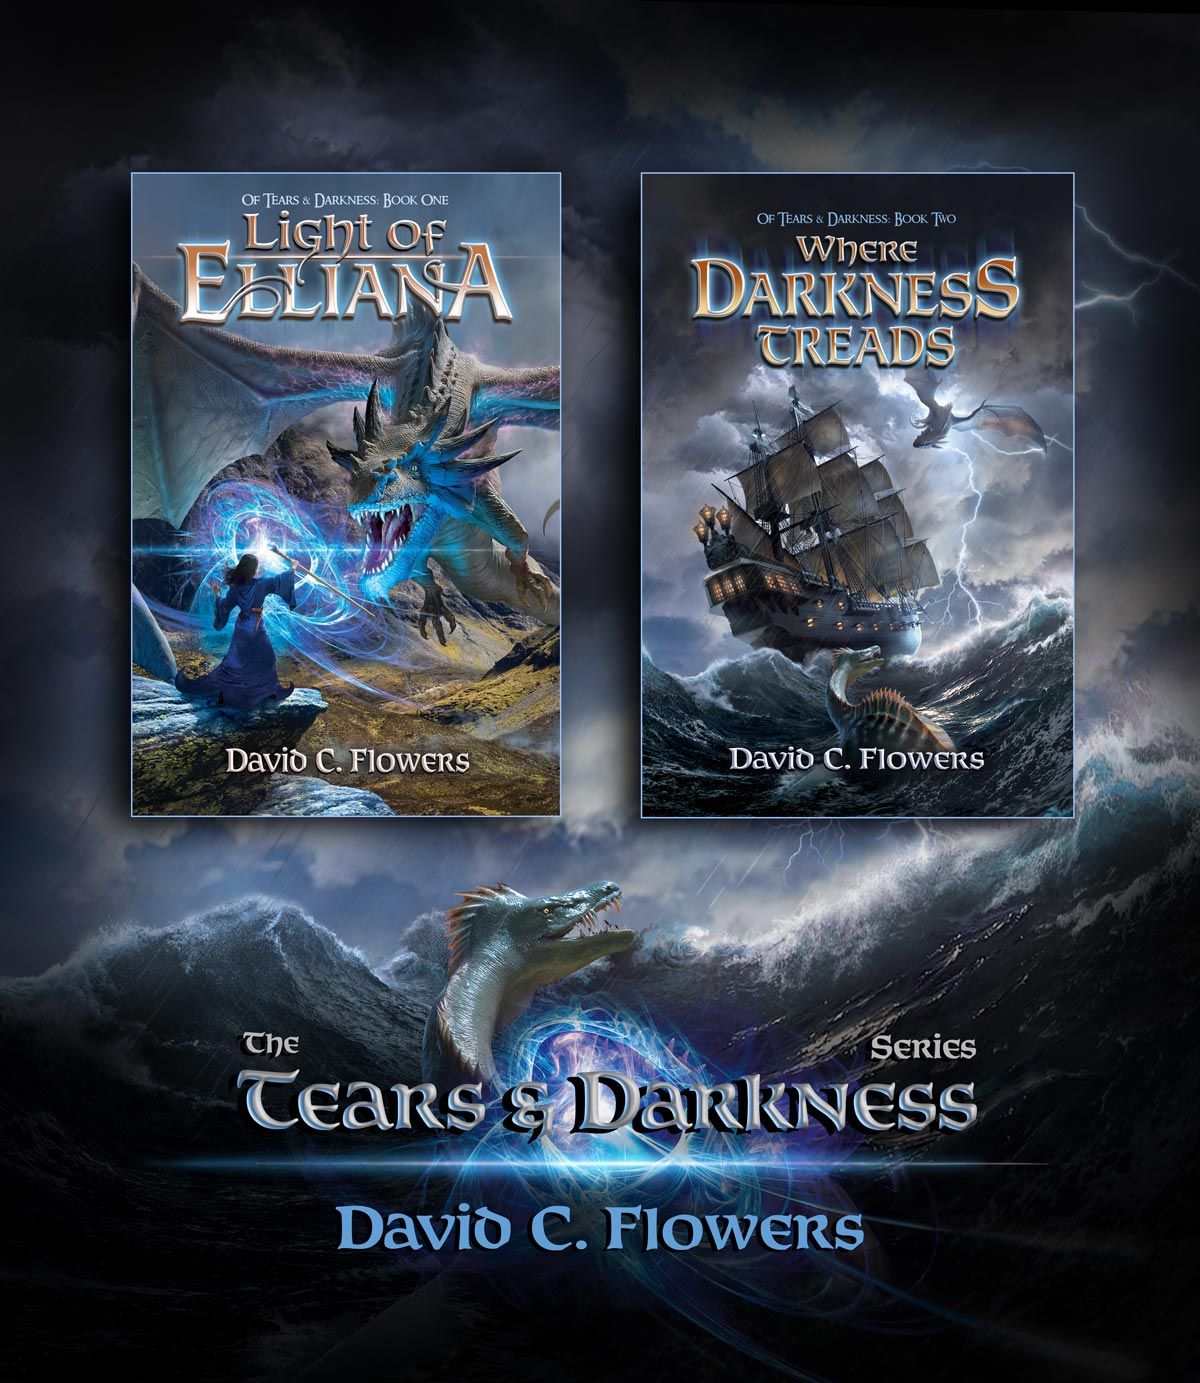 Book cover designs for the Tears & Darkness series.